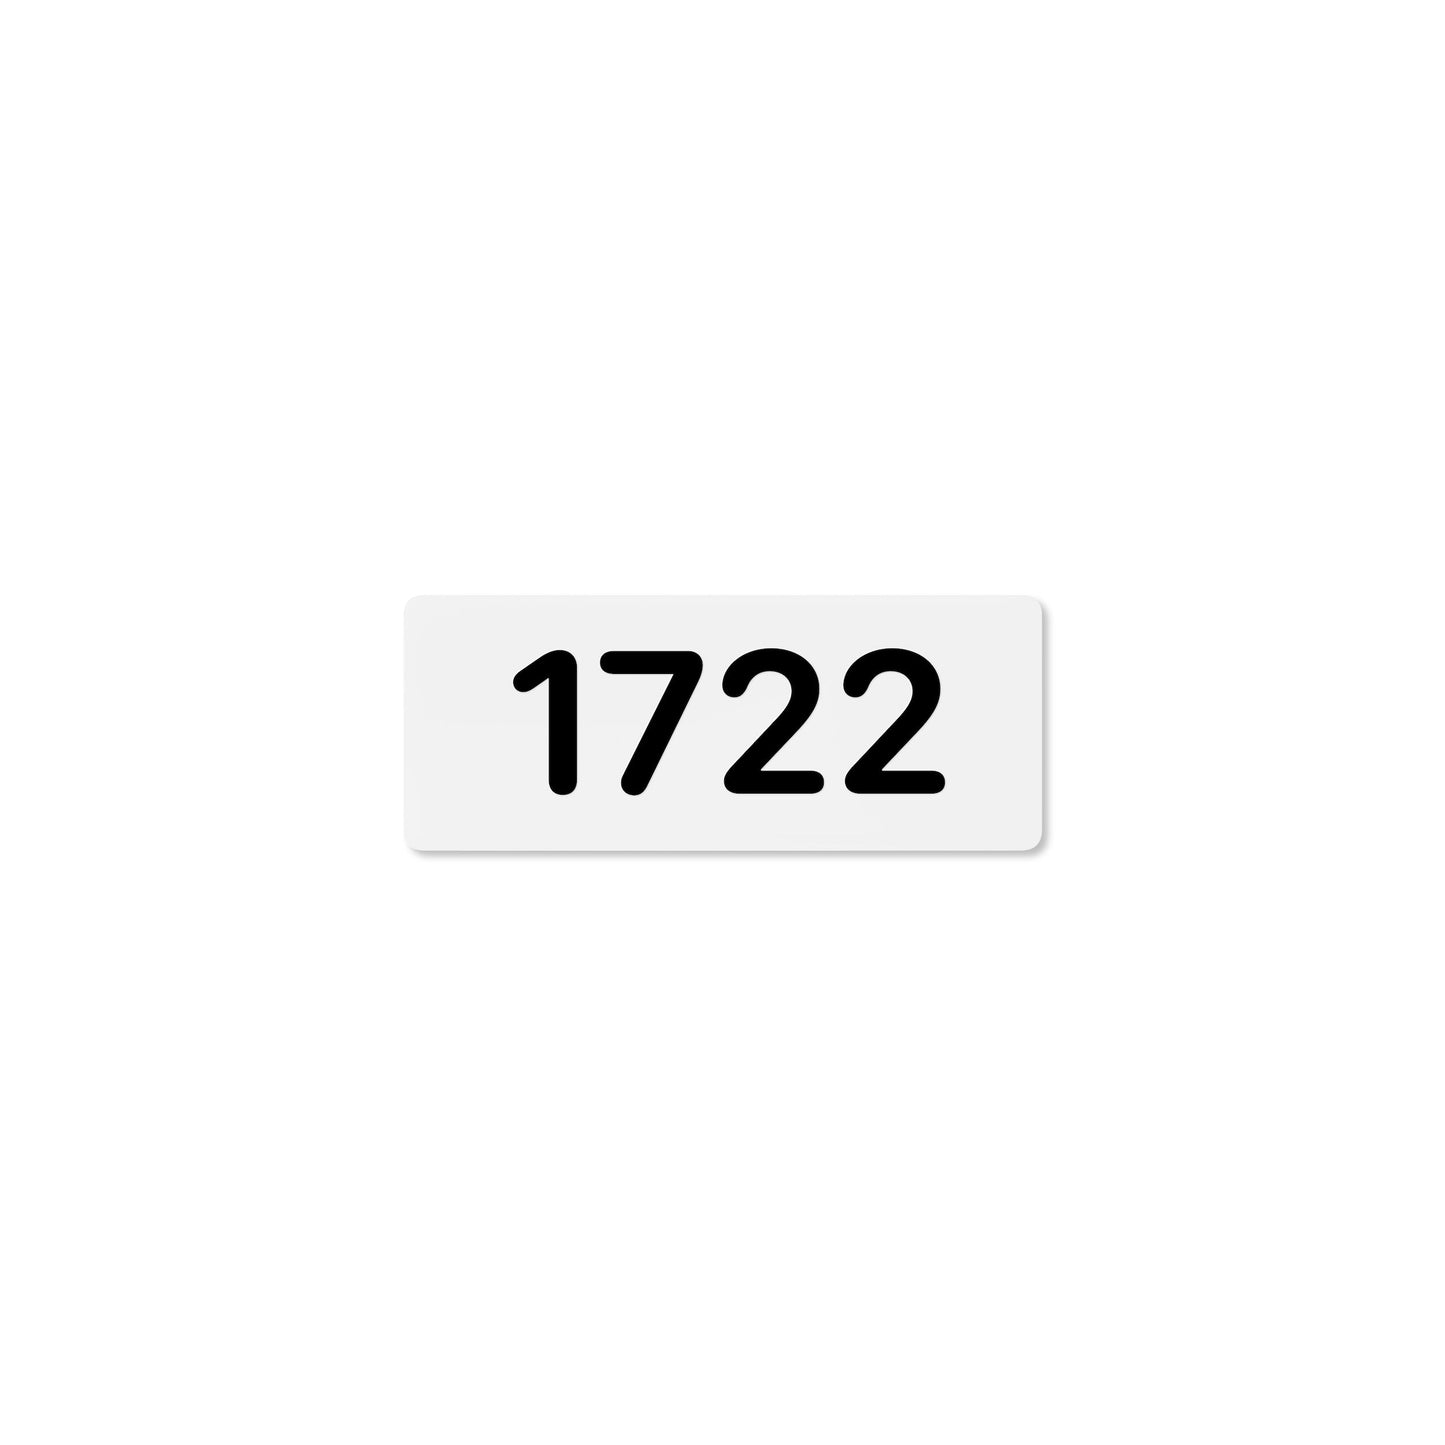 Numeral 1722